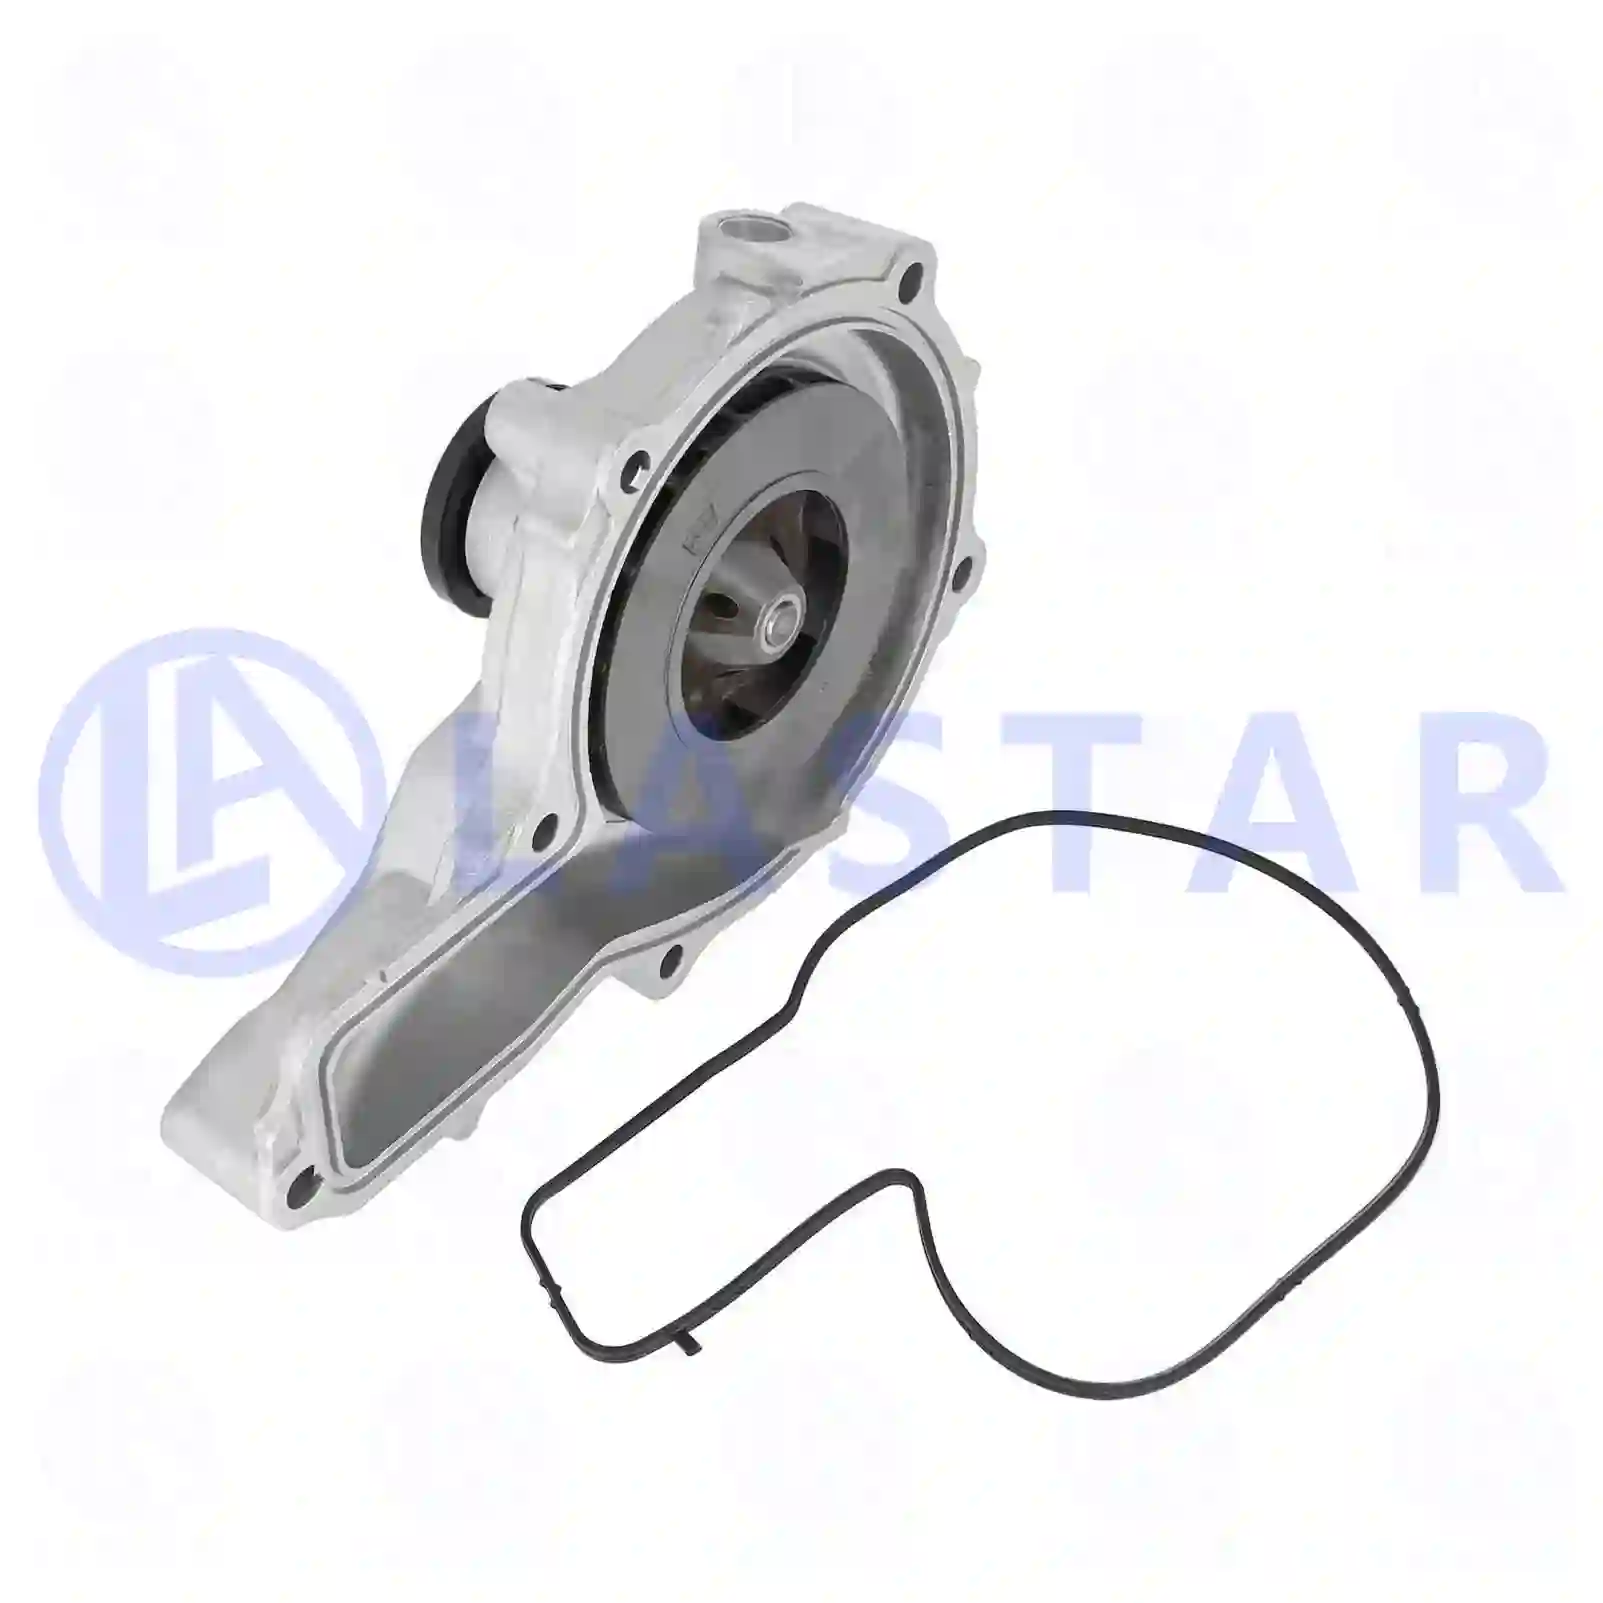 Water Pump Water pump, without pulley, la no: 77707128 ,  oem no:20744944, 21228795, 21468472, 22195450, 85003160, 85003709, 7420744939, 7420744940, 7421615952, 7422167707, 7422197707, 7485000763, 7485013068, 20451516, 20464403, 20538820, 20538845, 20744939, 20744940, 21221878, 21228793, 21468471, 21615952, 2201101, 22195450, 22197705, 22902431, 3161436, 3801102, 3801418, 3801484, 3803844, 3803930, 85000062, 85000347, 85000486, 85003125, 85003708, 85006062, 85020085, 85021450, ZG00771-0008 Lastar Spare Part | Truck Spare Parts, Auotomotive Spare Parts